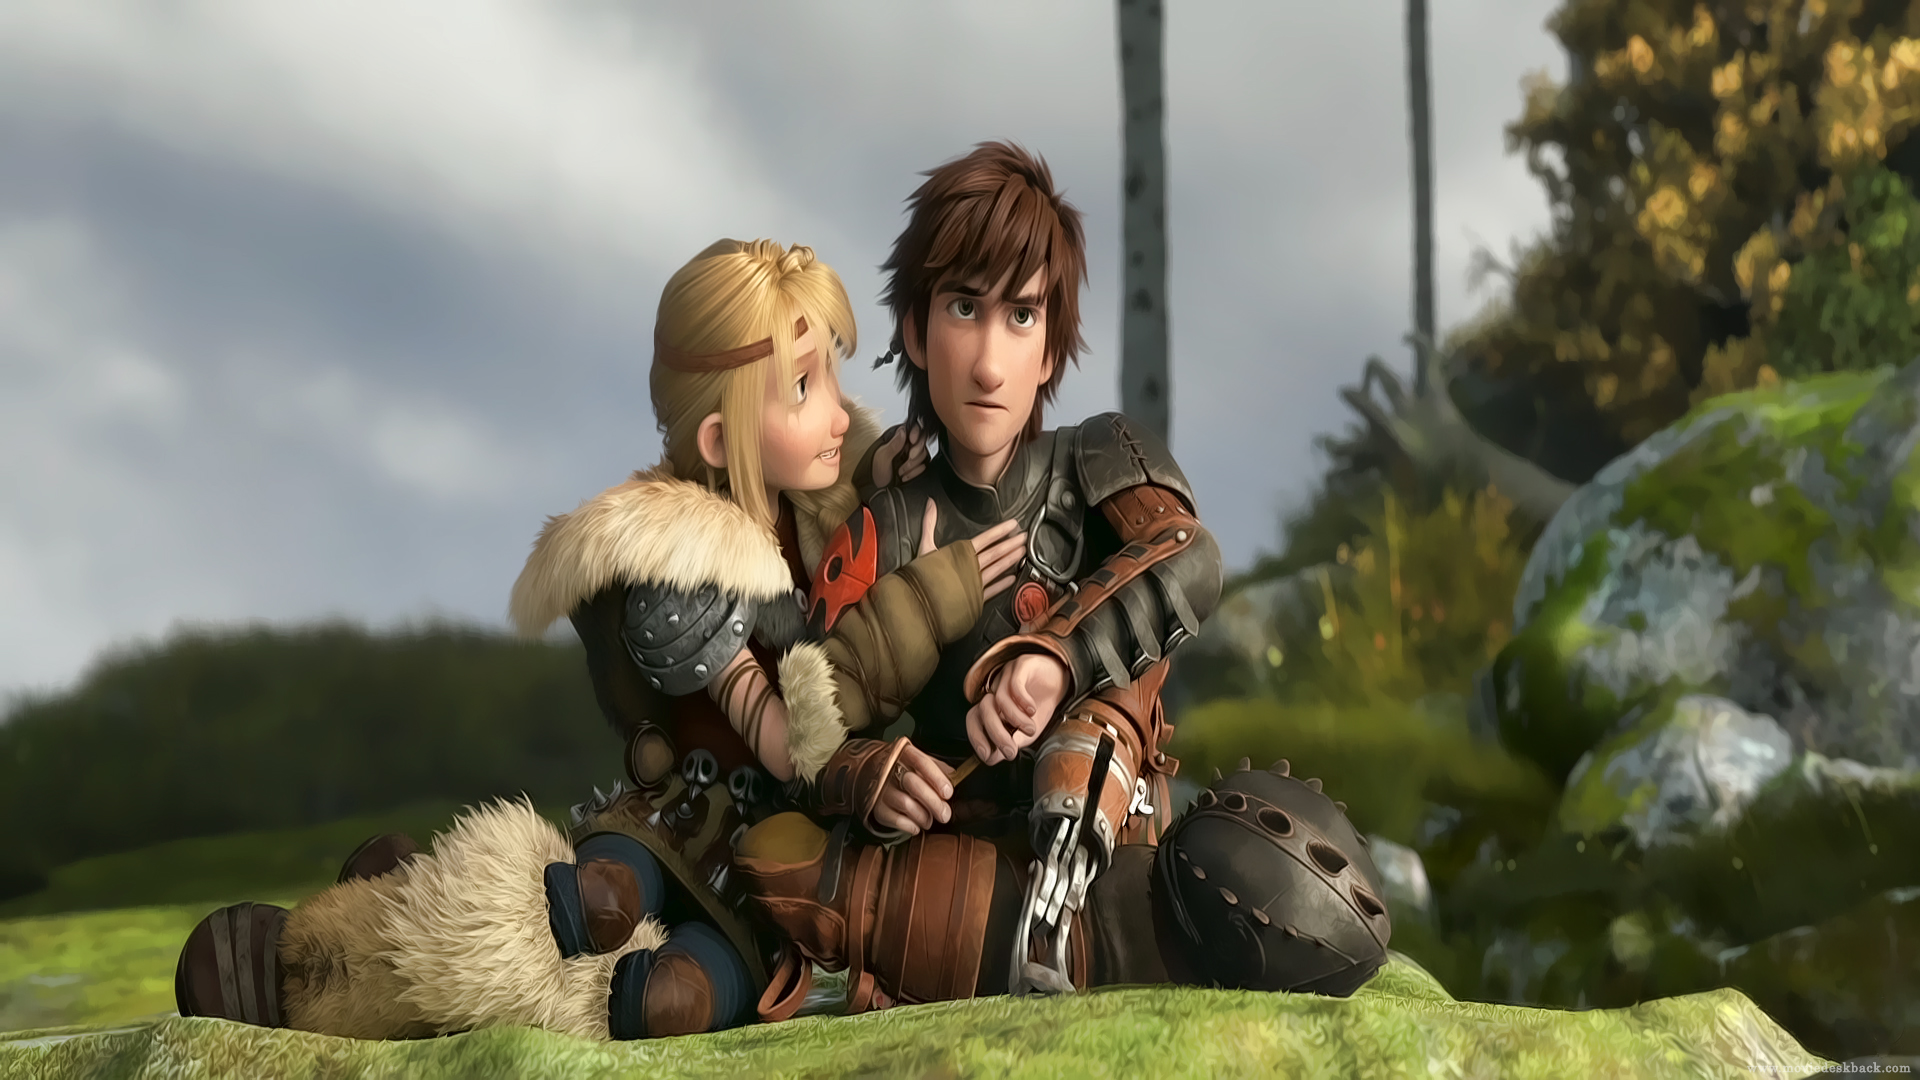 How To Train Your Dragon 2 Wallpaper - Dragon Trainer Hiccup And Astrid , HD Wallpaper & Backgrounds